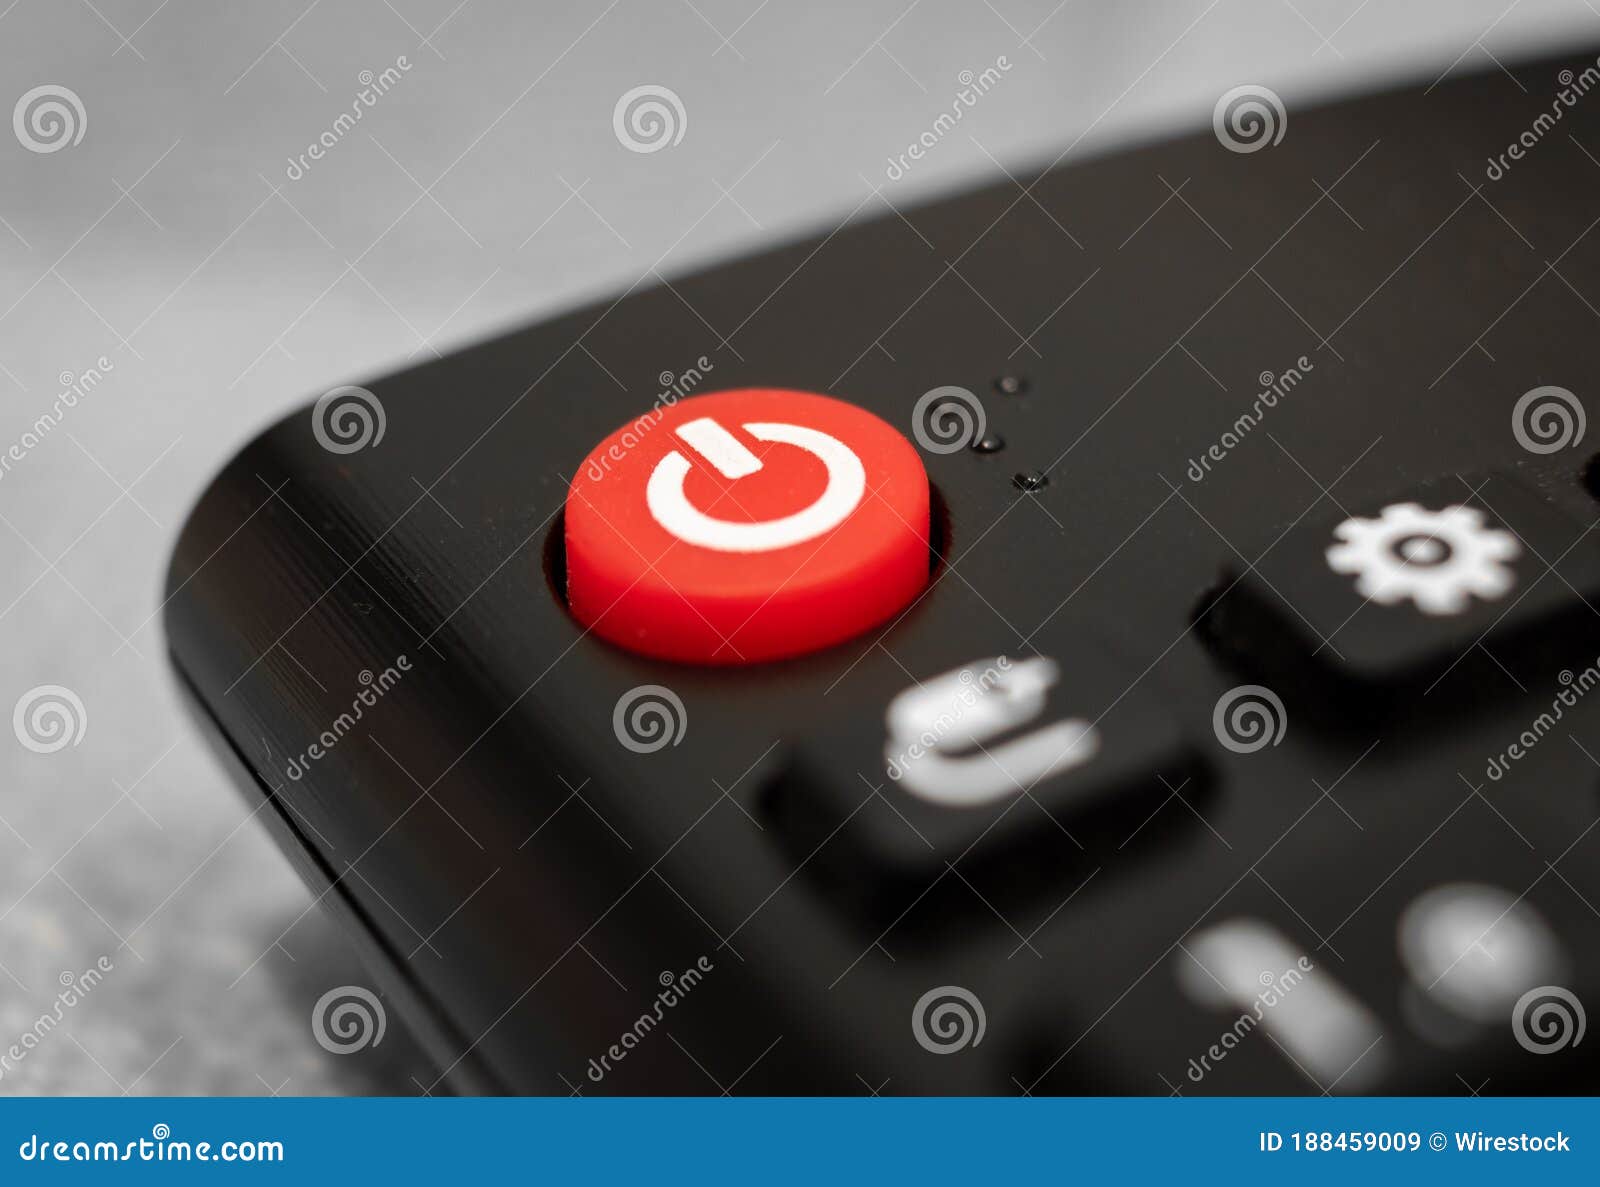 https://thumbs.dreamstime.com/z/closeup-red-turn-off-button-remote-control-under-lights-188459009.jpg